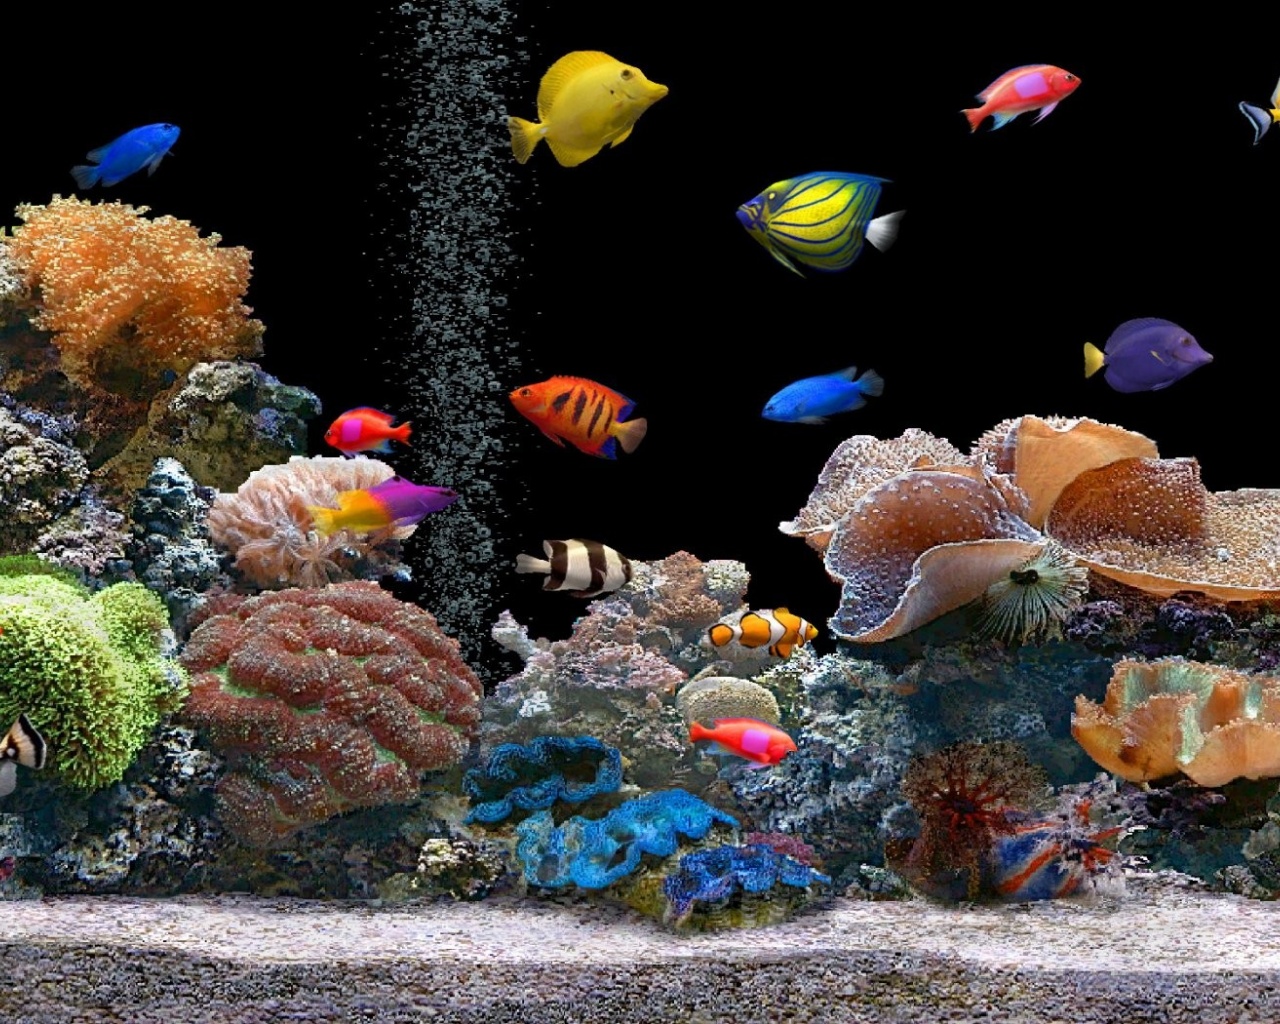 Free Images of Underwater World, Colorful Fishes Among Various Sea Plants, a Clean World! 1280X1024 free wallpaper download